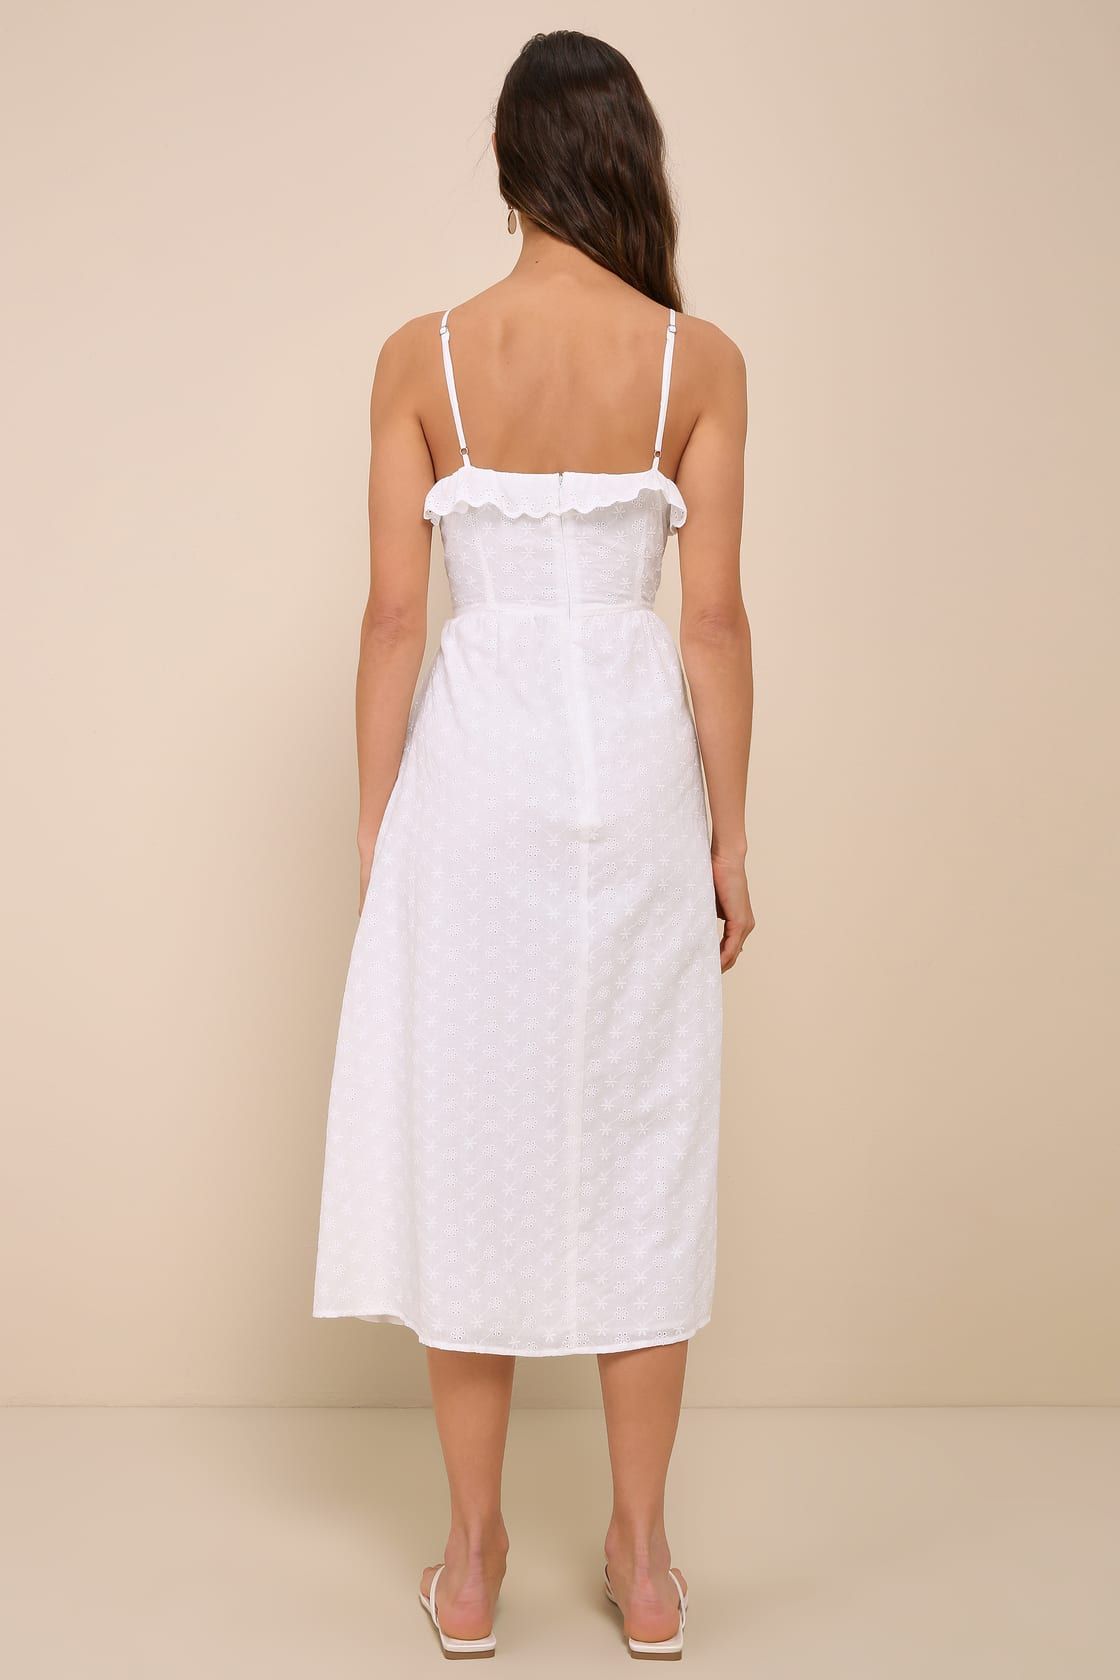 Lovely Weather White Embroidered Bustier Midi Dress with Pockets | Lulus